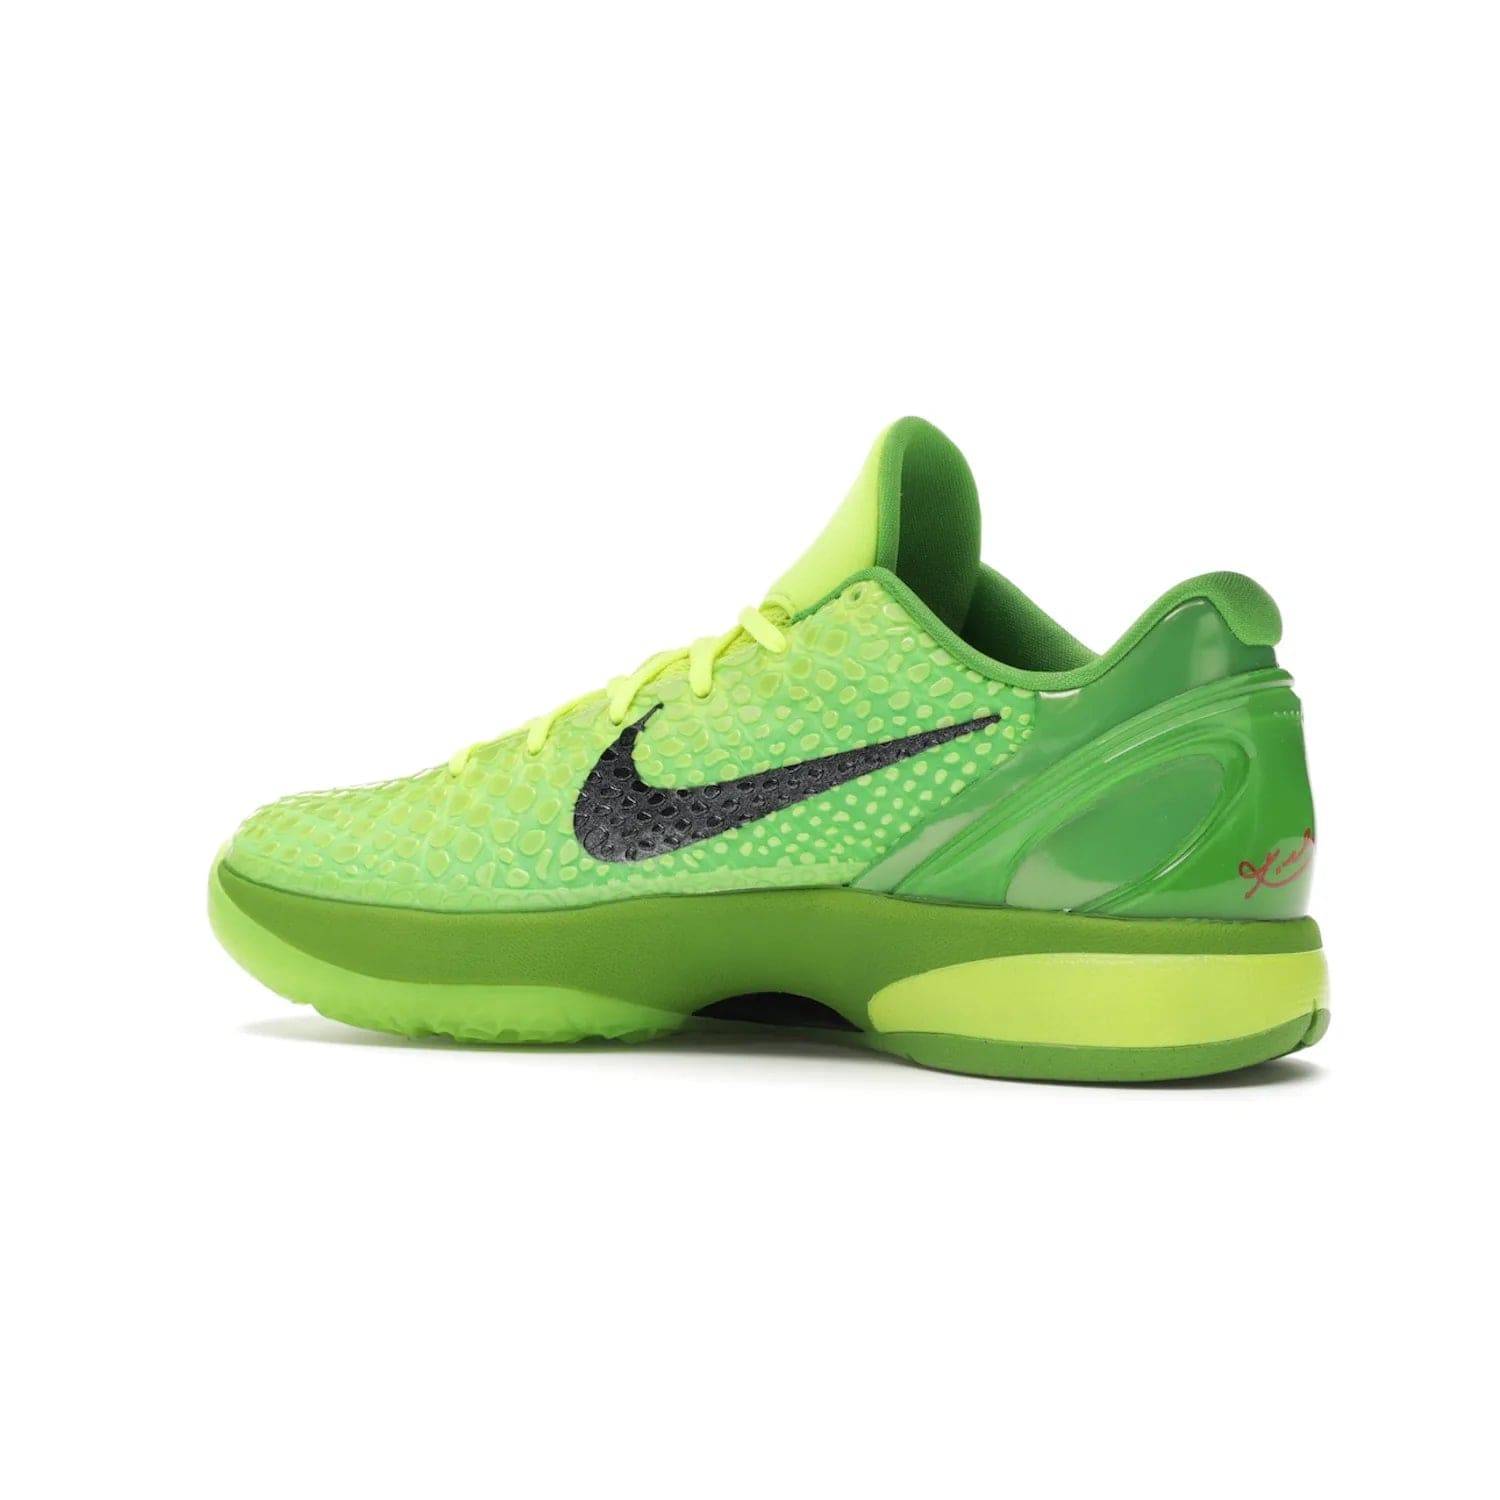 Nike Kobe 6 Protro Grinch (2020) - Image 22 - Only at www.BallersClubKickz.com - #
The Nike Kobe 6 Protro Grinch updates the iconic 2011 design with modern tech like a Zoom Air cushioning system, scaled-down traction, and updated silhouette. Experience the textured Green Apple and Volt upper plus bright red and green accents for $180.